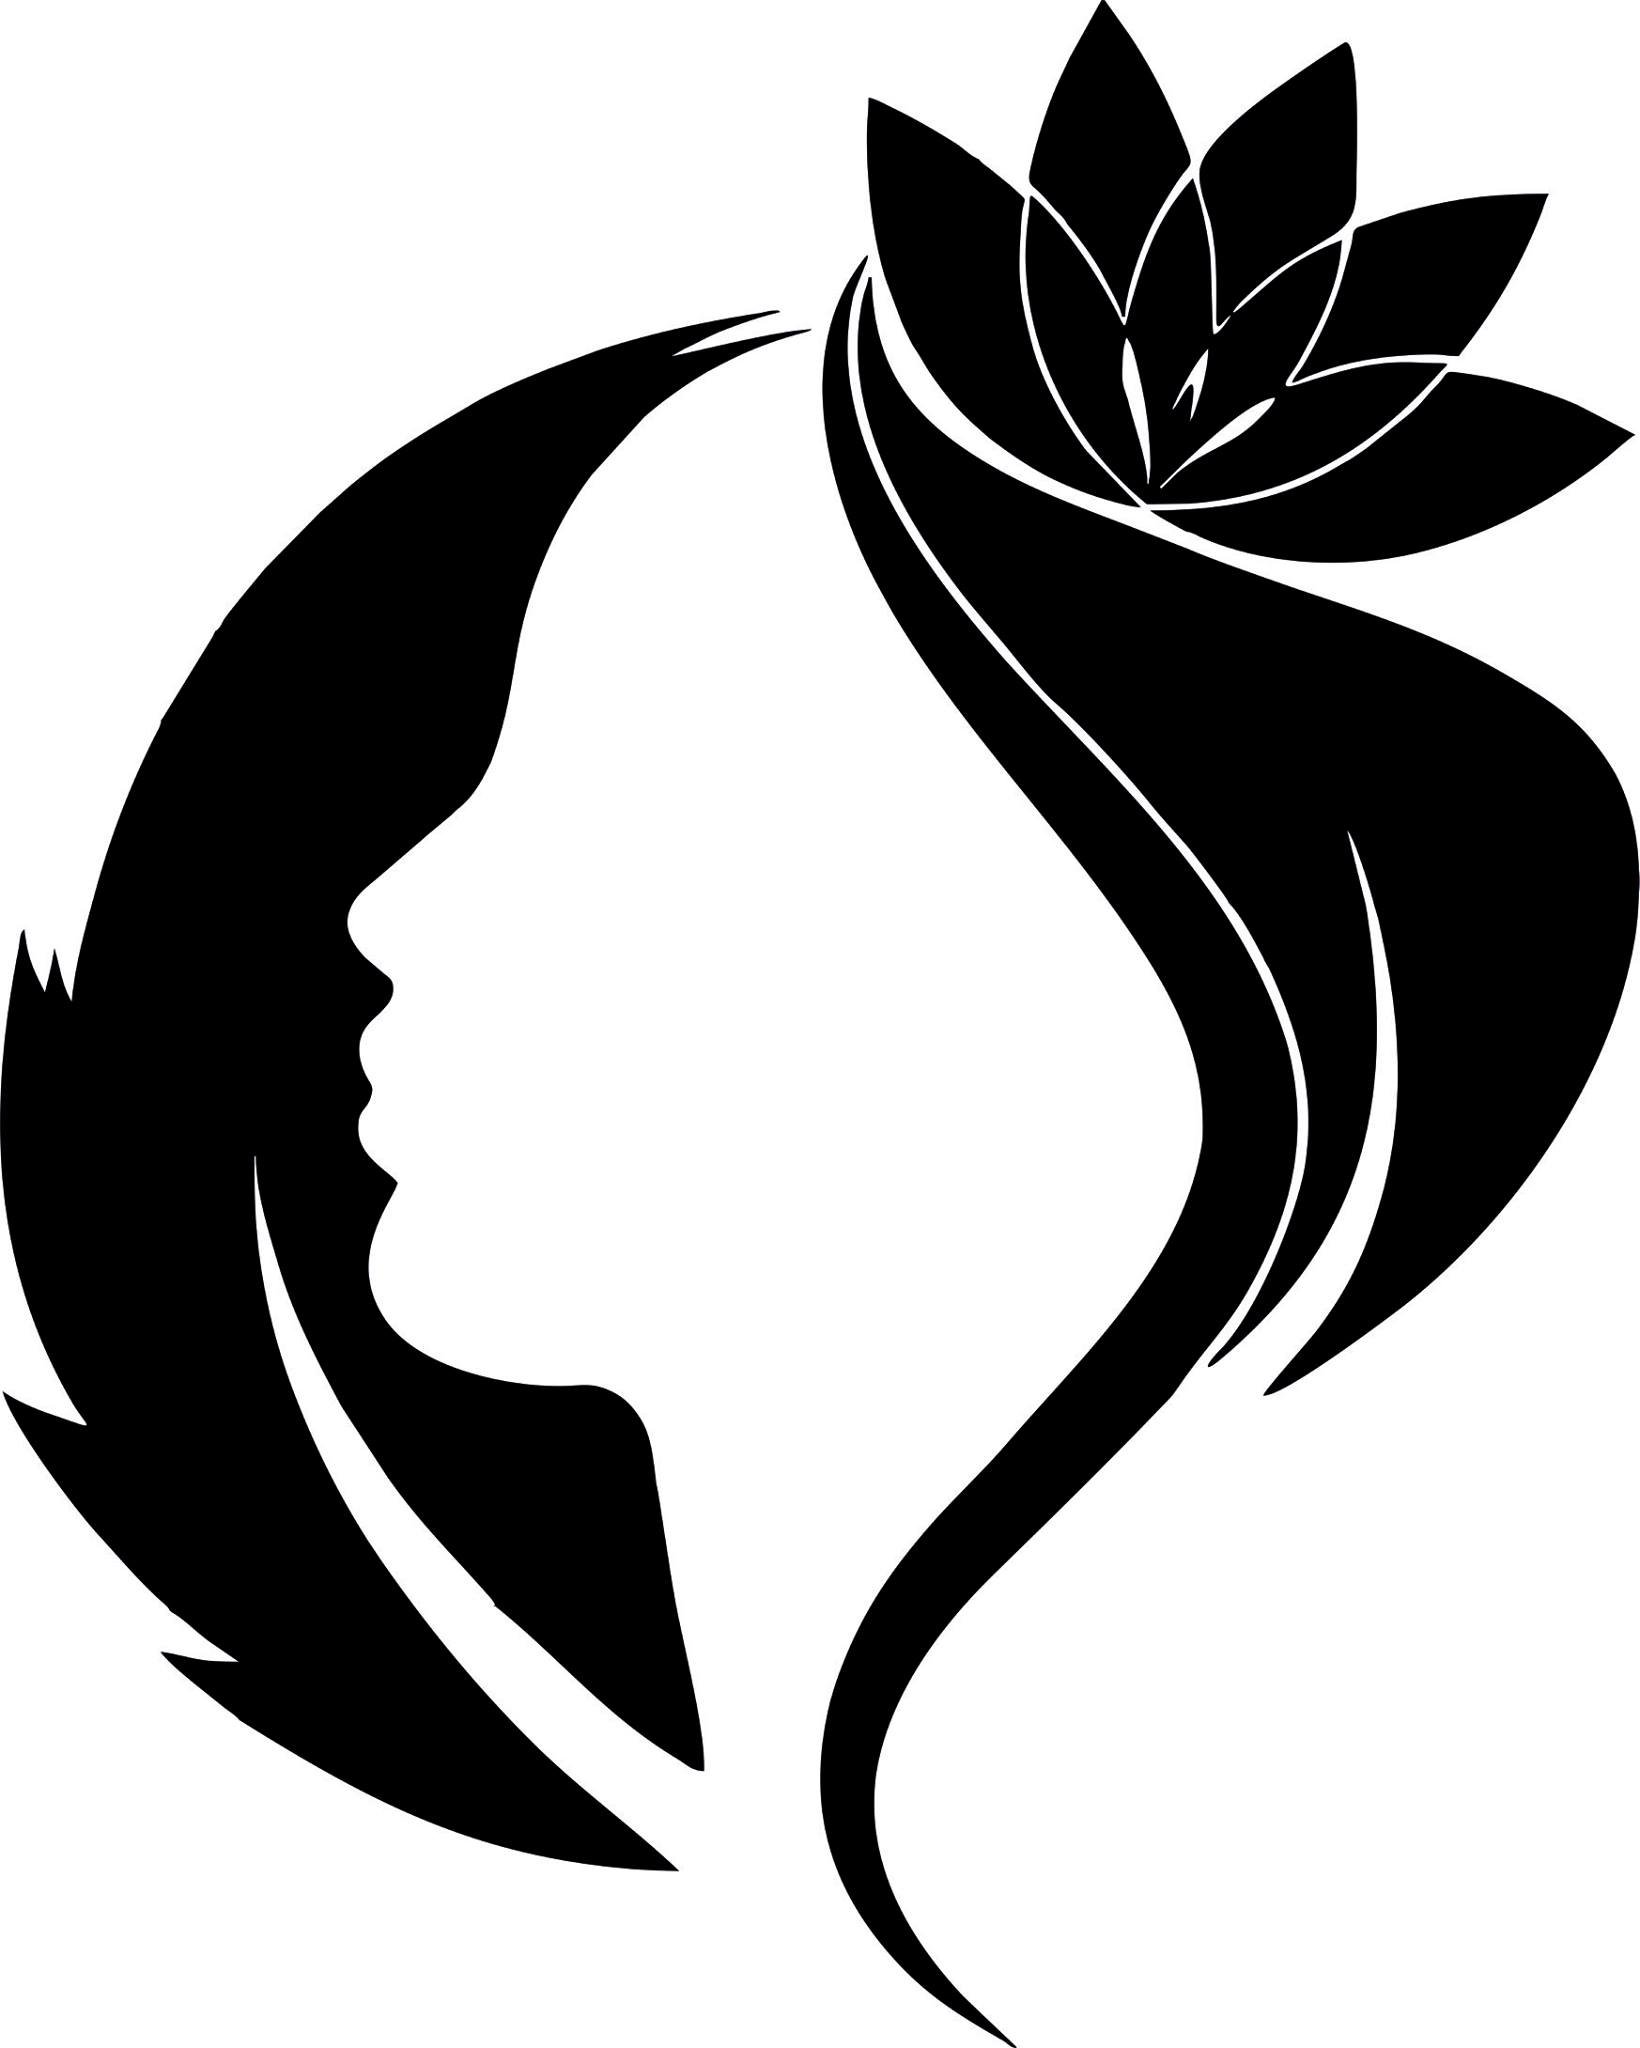 Download Spring Woman Vector Art jpg Image Free Download - 3axis.co